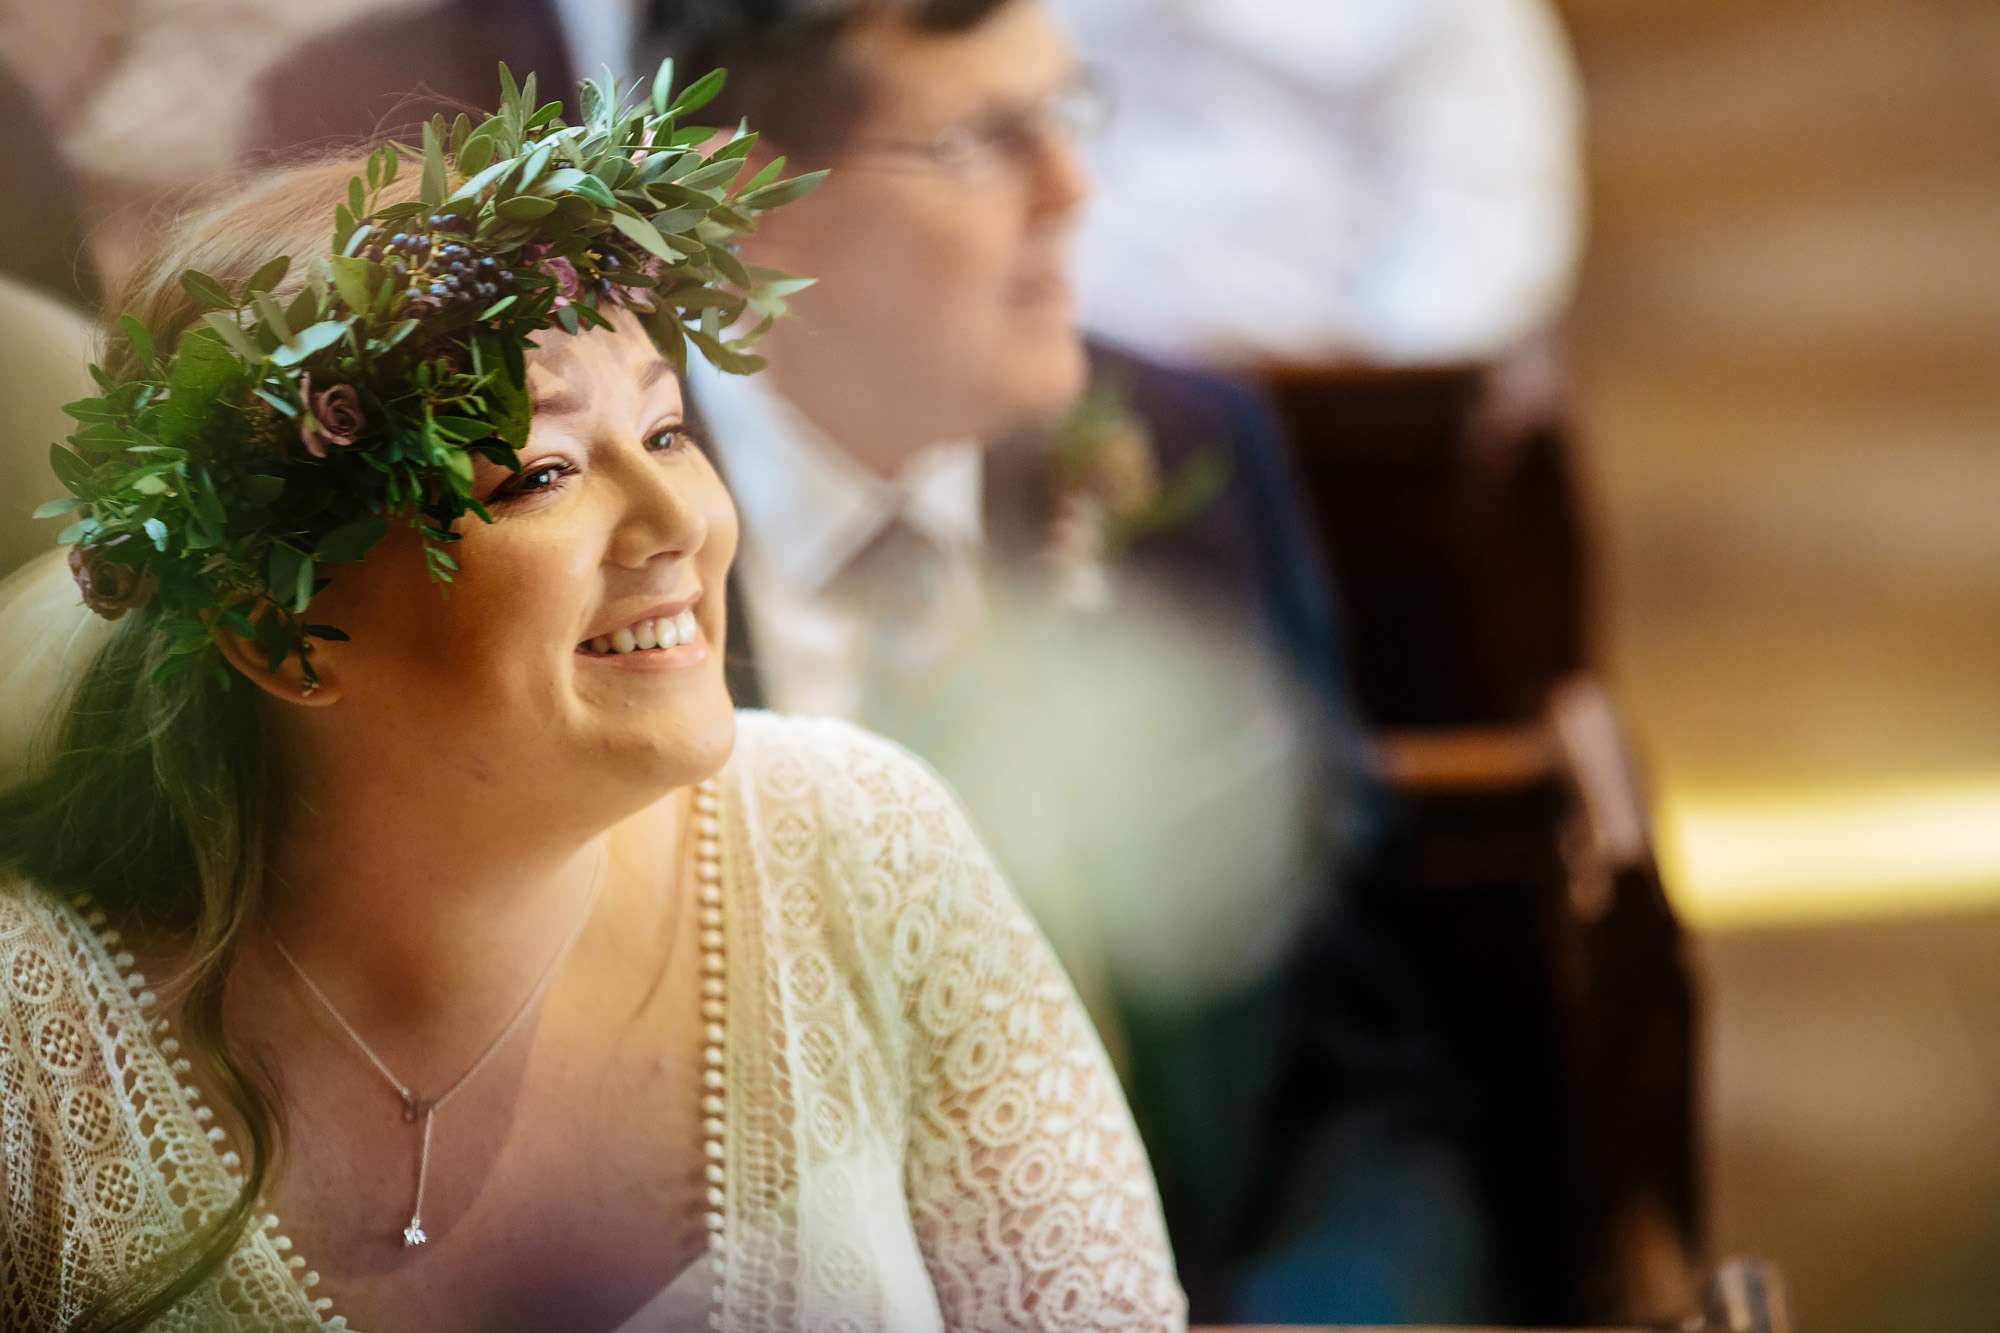 Bride smiles during her church wedding ceremony